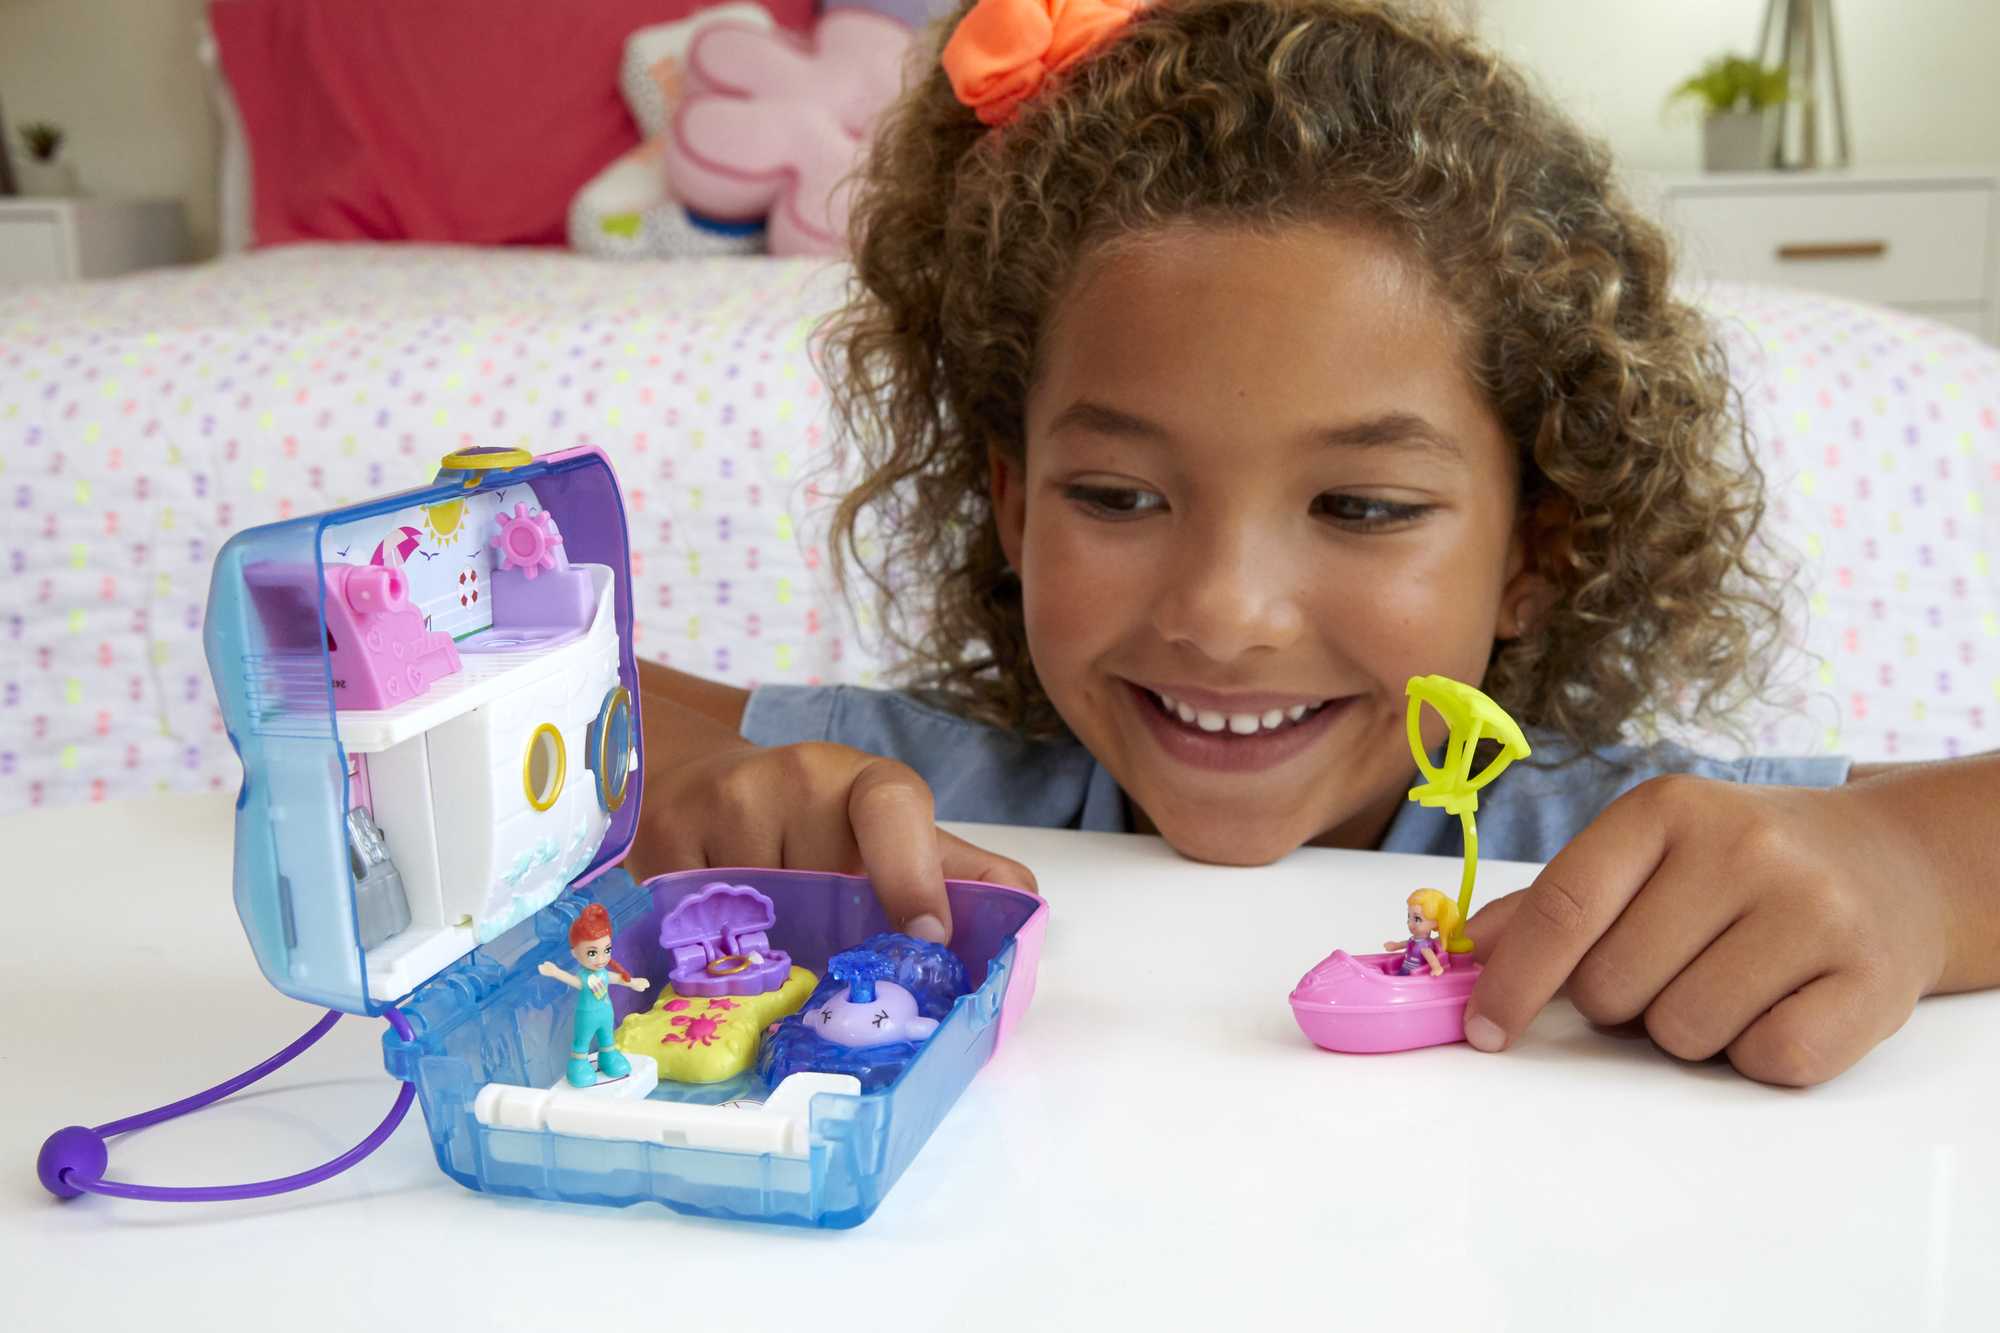 Polly Pocket Pocket World Sweet Sails Cruise Ship Compact Playset with 2 Micro Dolls & Accessories - image 3 of 7